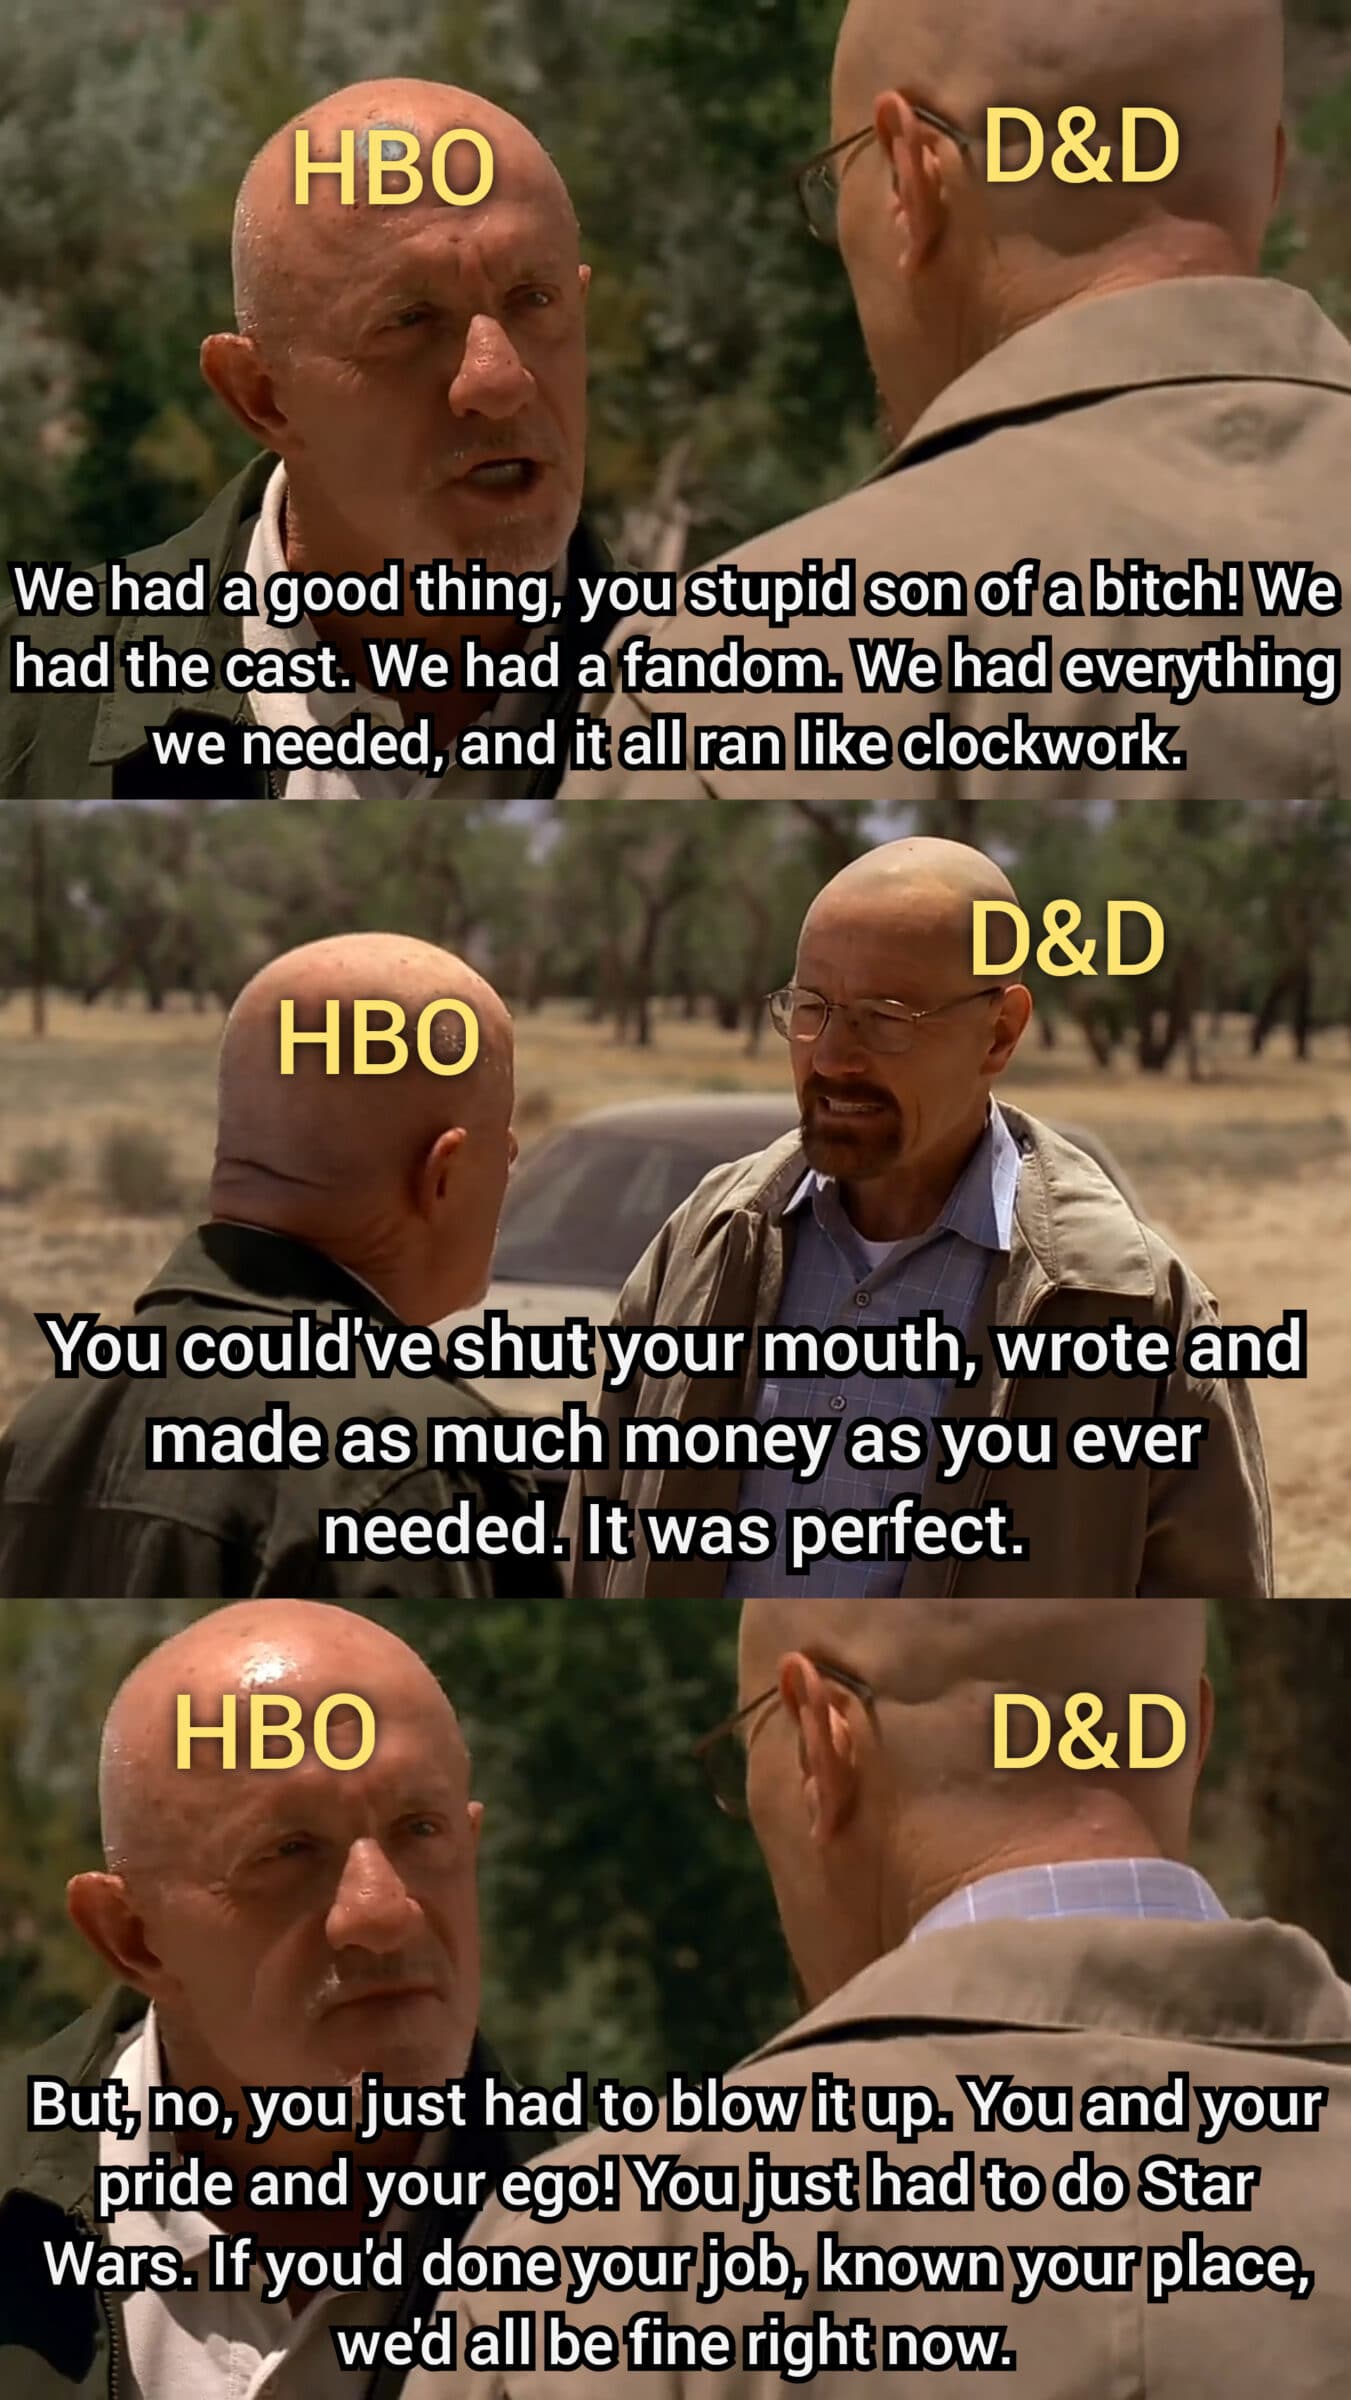 D-n-d, Star Wars, Mike, GoT, Walt, Gus Game of thrones memes D-n-d, Star Wars, Mike, GoT, Walt, Gus text: HSo kWe1had a good tning, you stupid son of a bitch! We had the cast, We had a fandom. We had everything we needed,jand it all ran like clockwork. HBO You)could'.yeshut your mouth, wrote and maderaSmuchnoney/as you ever needed. It was/perfect. HBO IBut, no, you just had to blow it up. You and your pride and your ego! You just had to do Star Wars.Uyou'd done your job, known your place, we'd all be fine right now. 